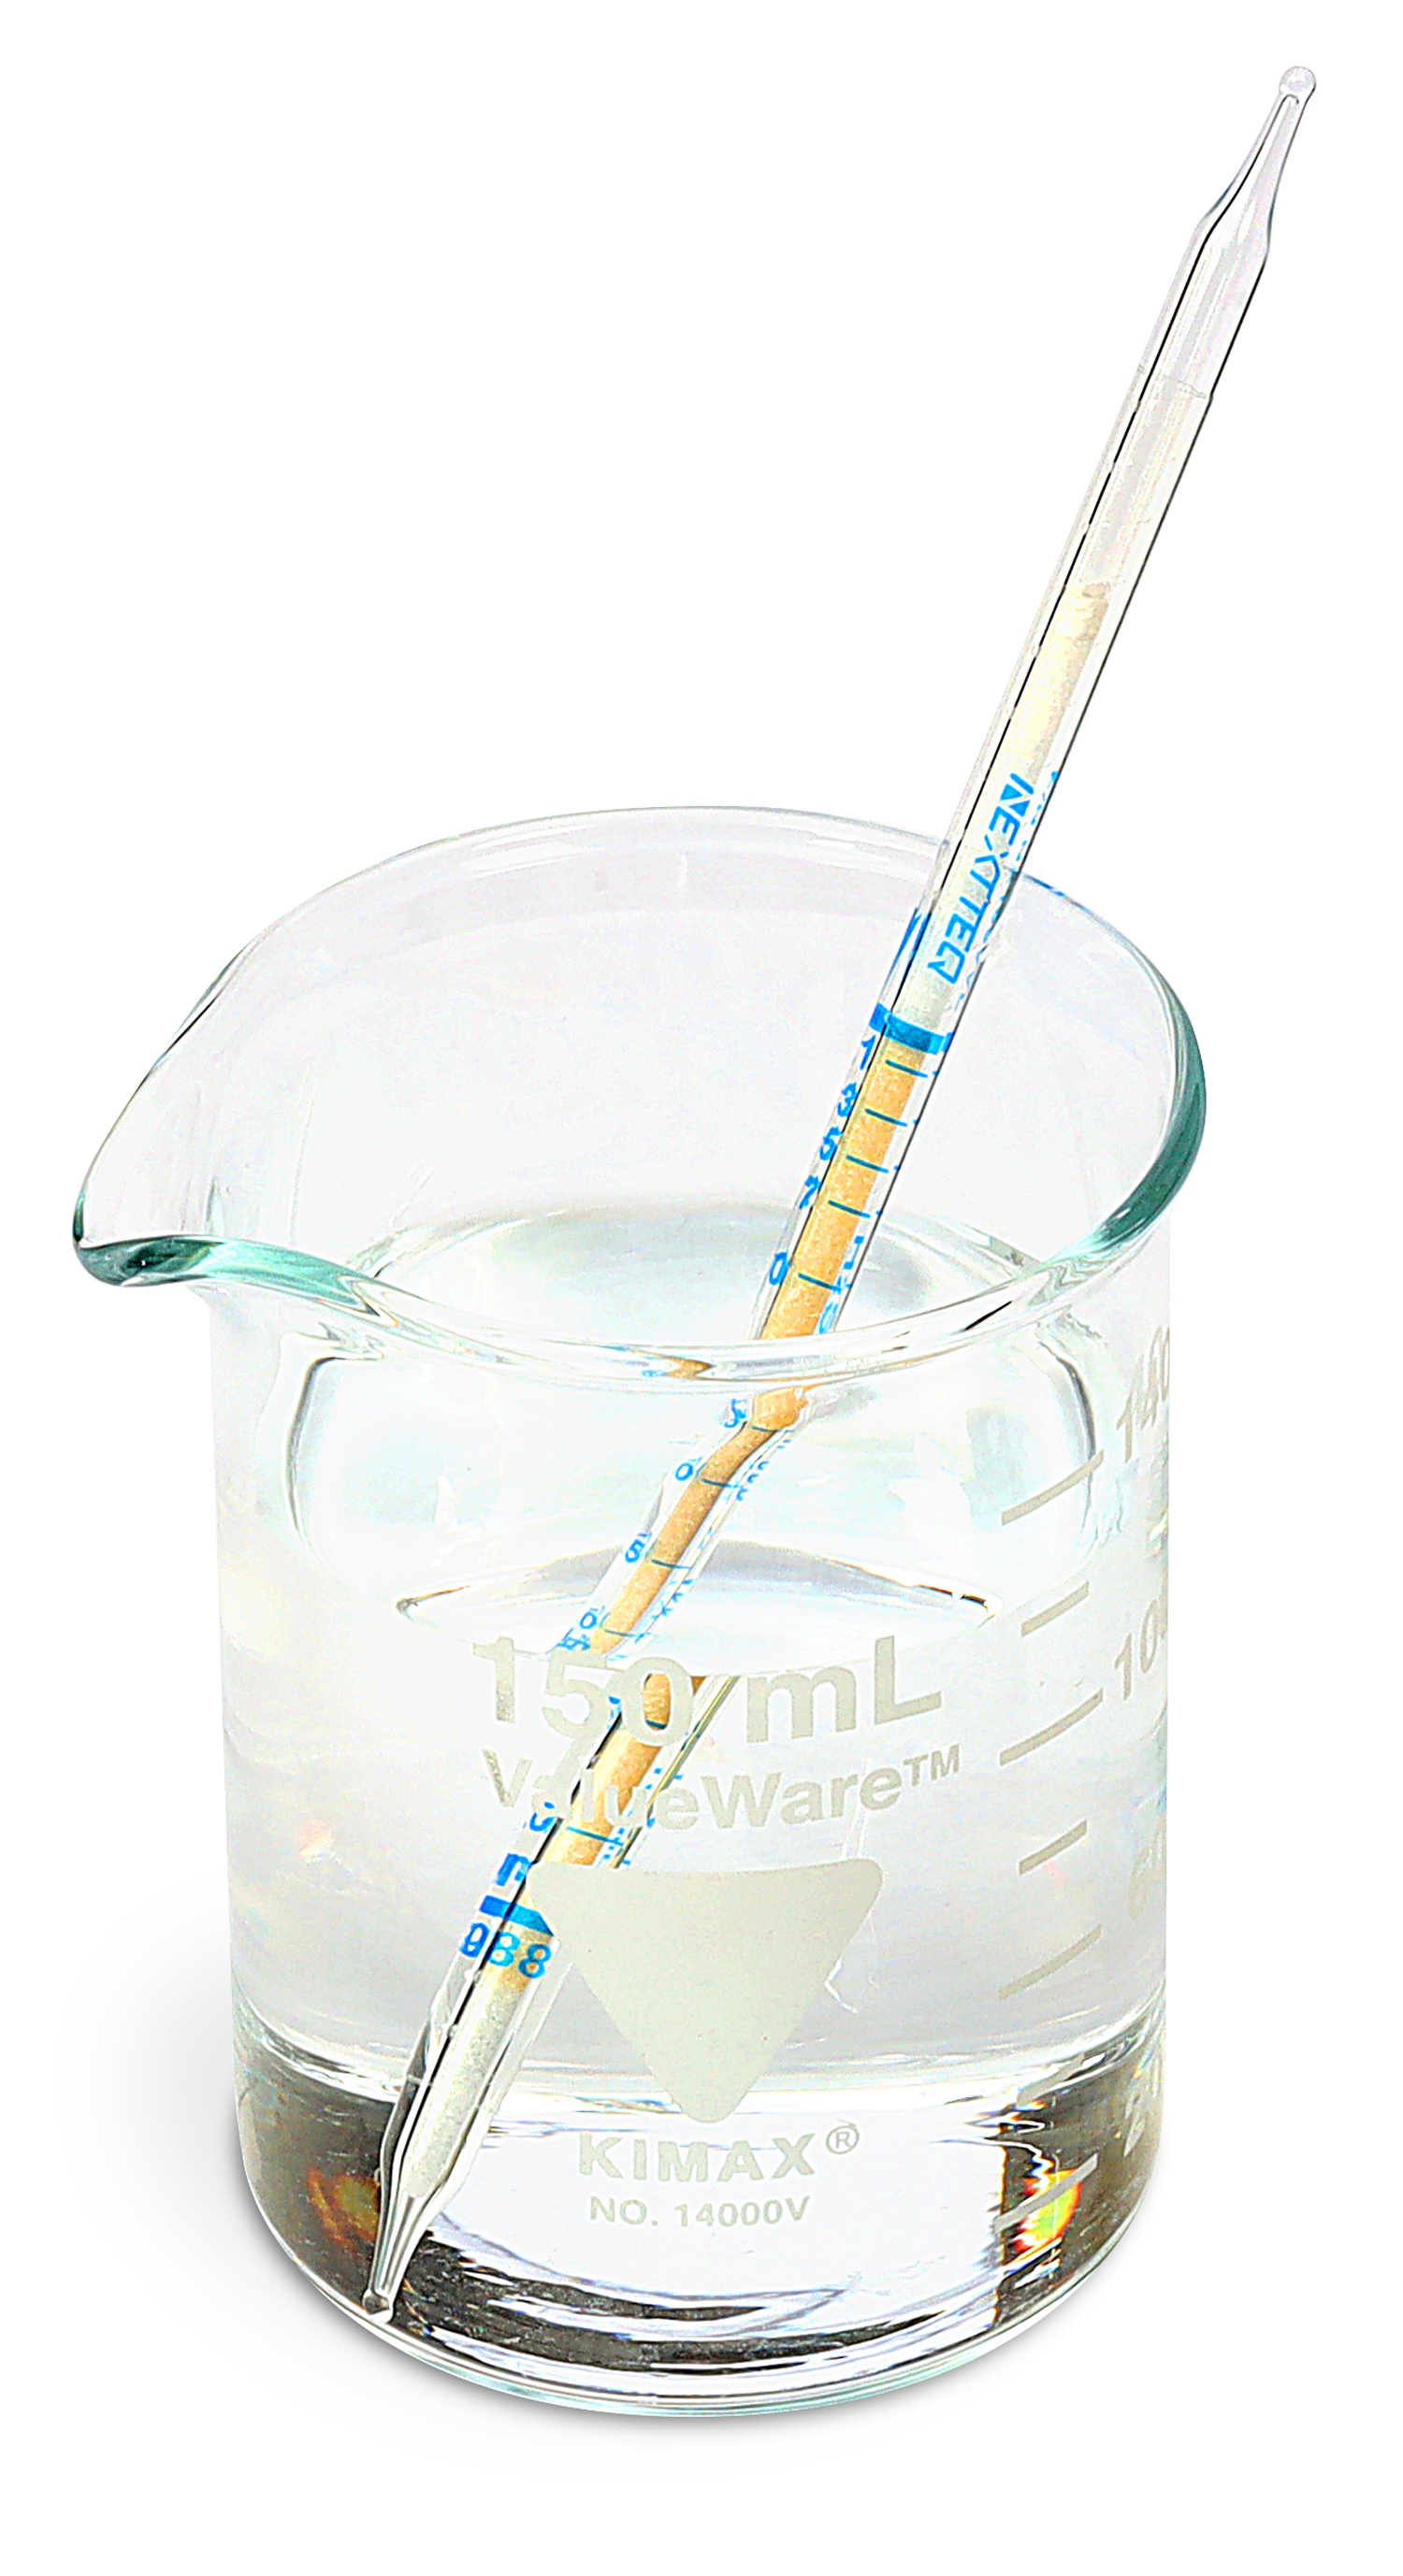 A Nextteq® brand-labeled solution detector tube in a beaker of clear liquid.